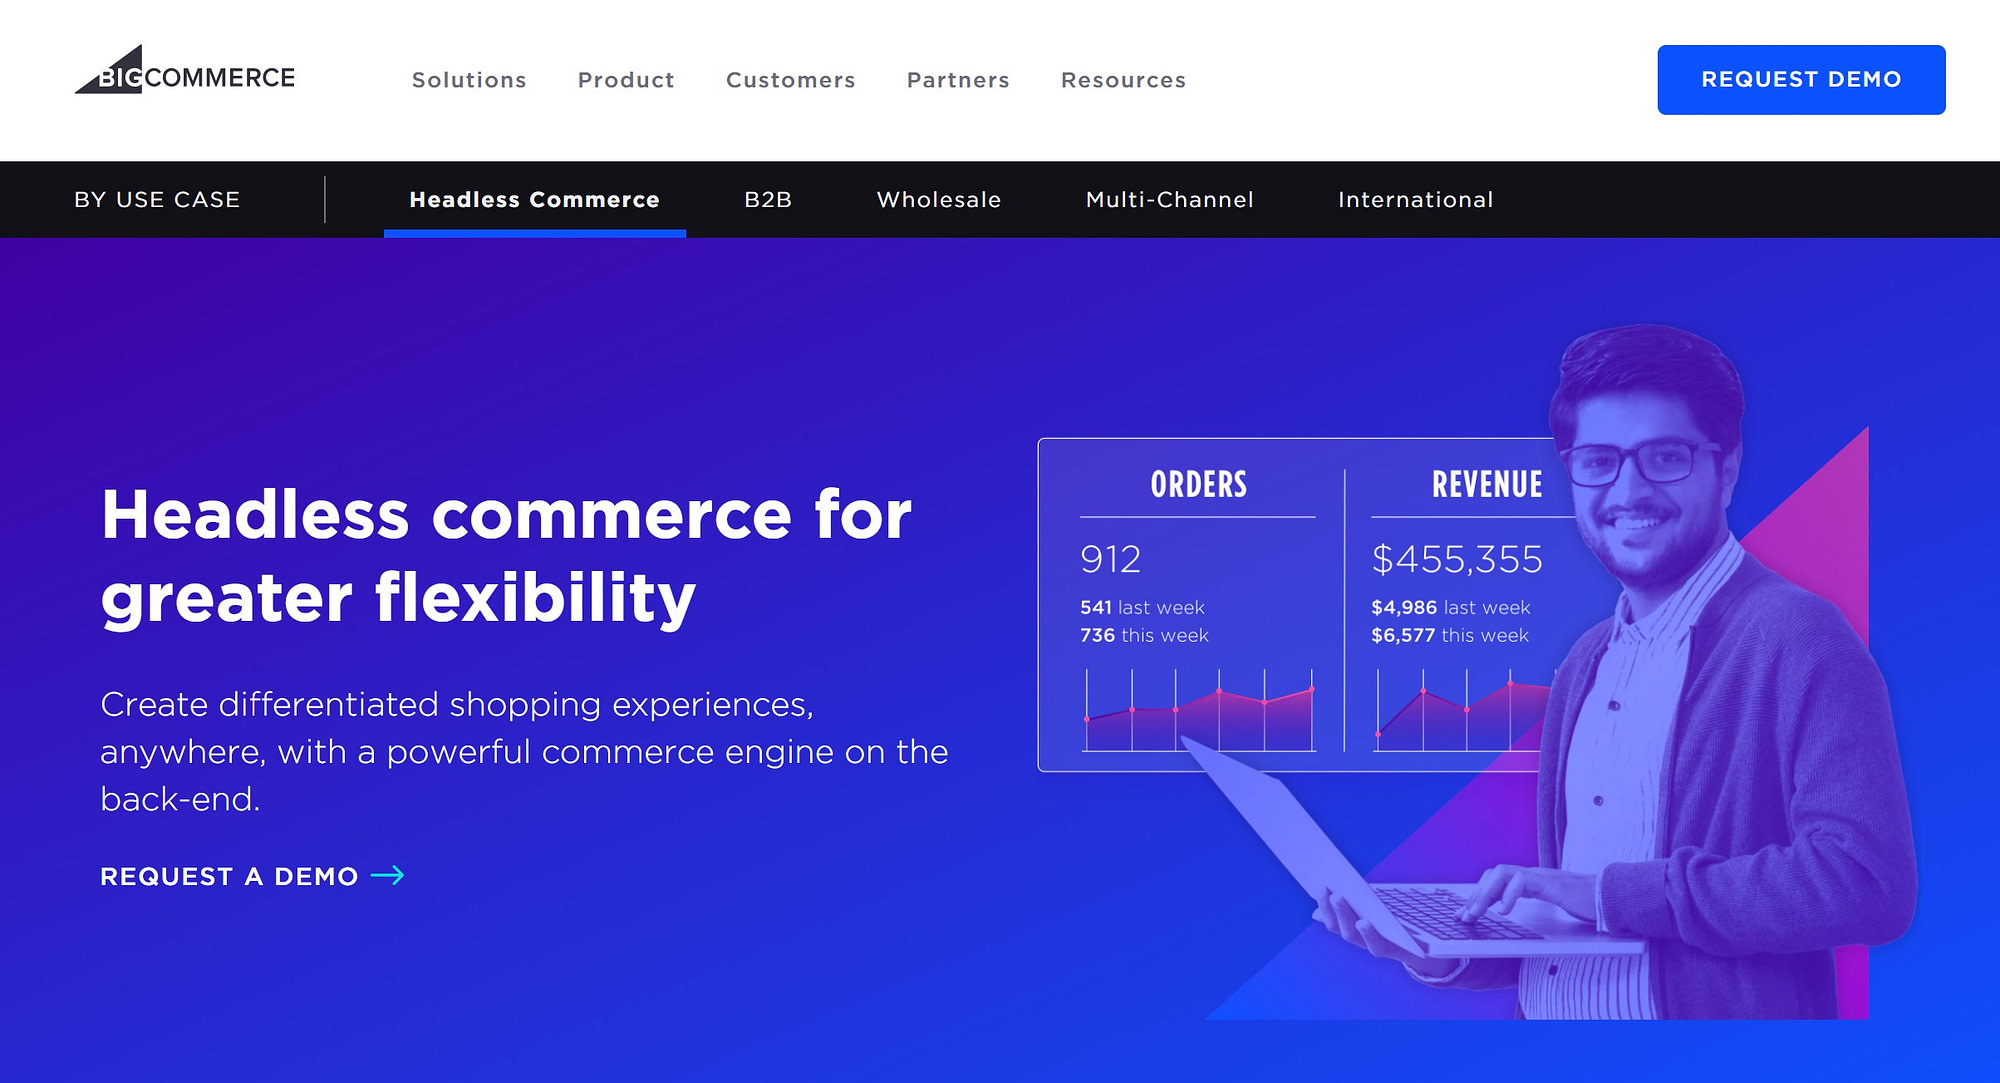 BigCommerce is one way to implement headless eCommerce